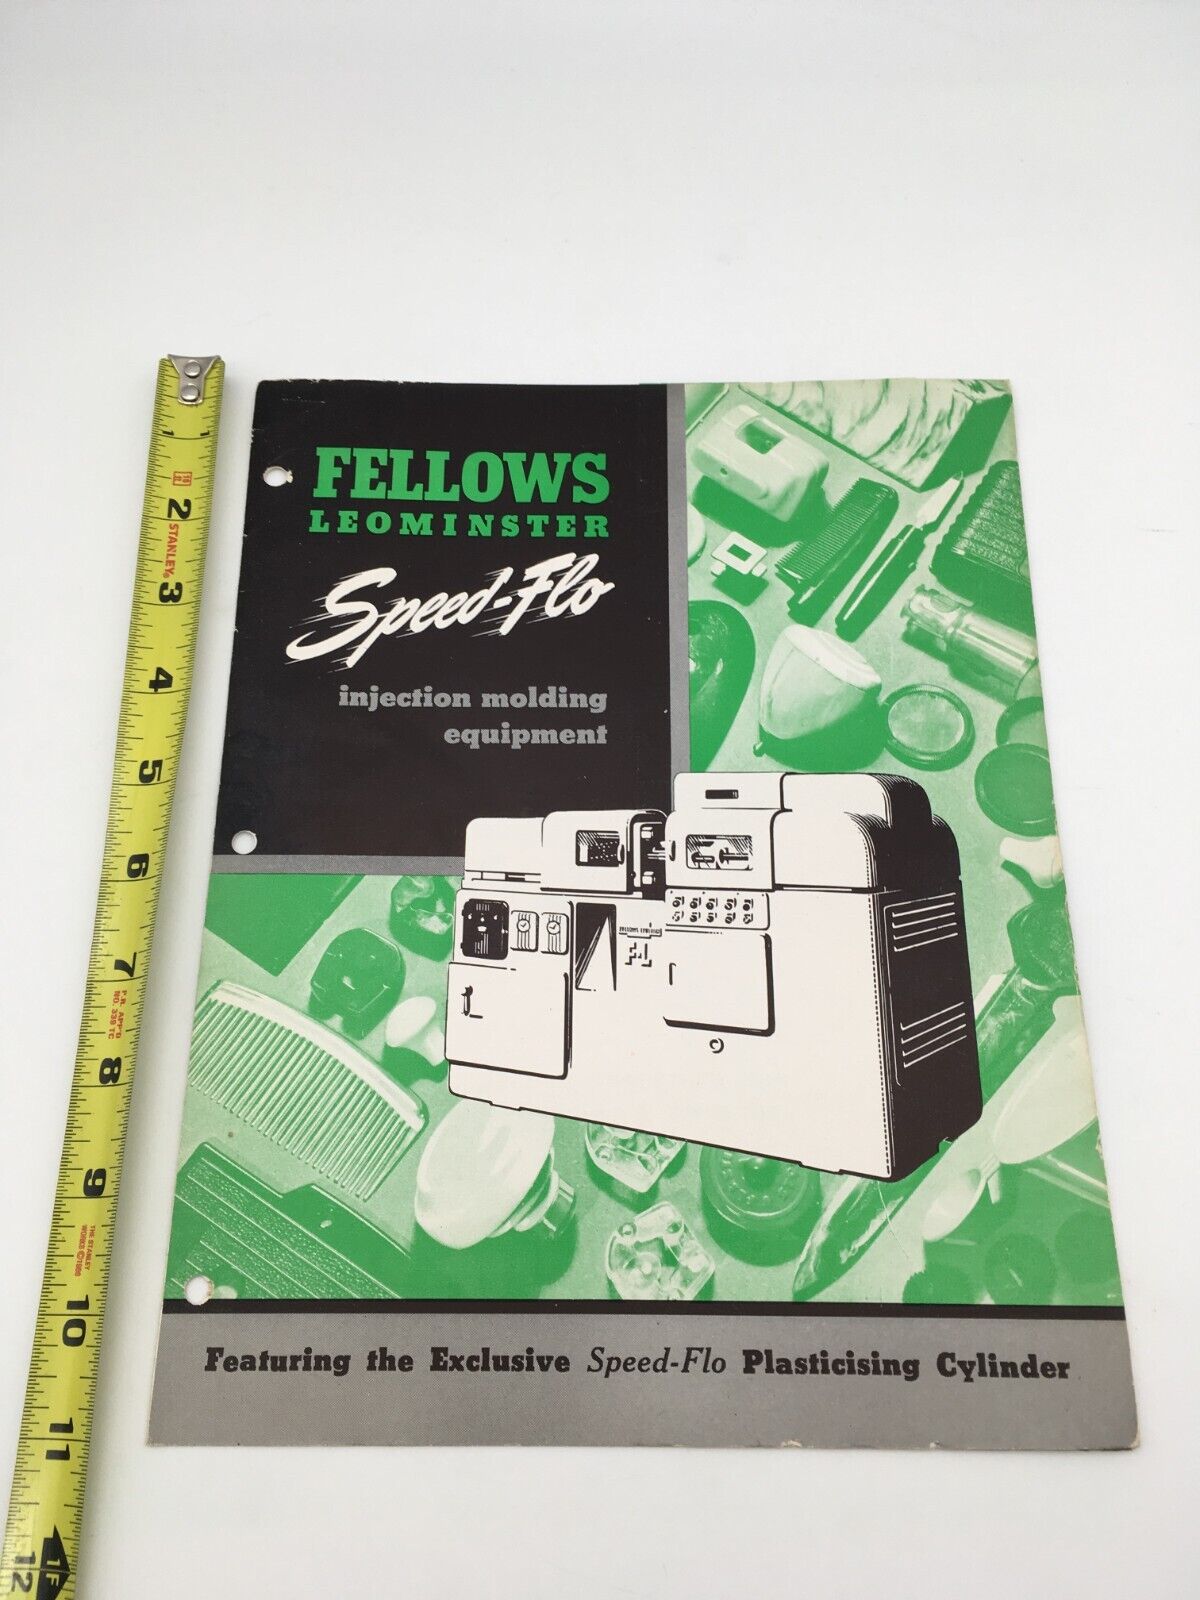 VINTAGE 1947 FELLOWS INJECTION MOLDING EQUIPMENT - SALES/SPECIFICATION BROCHURE